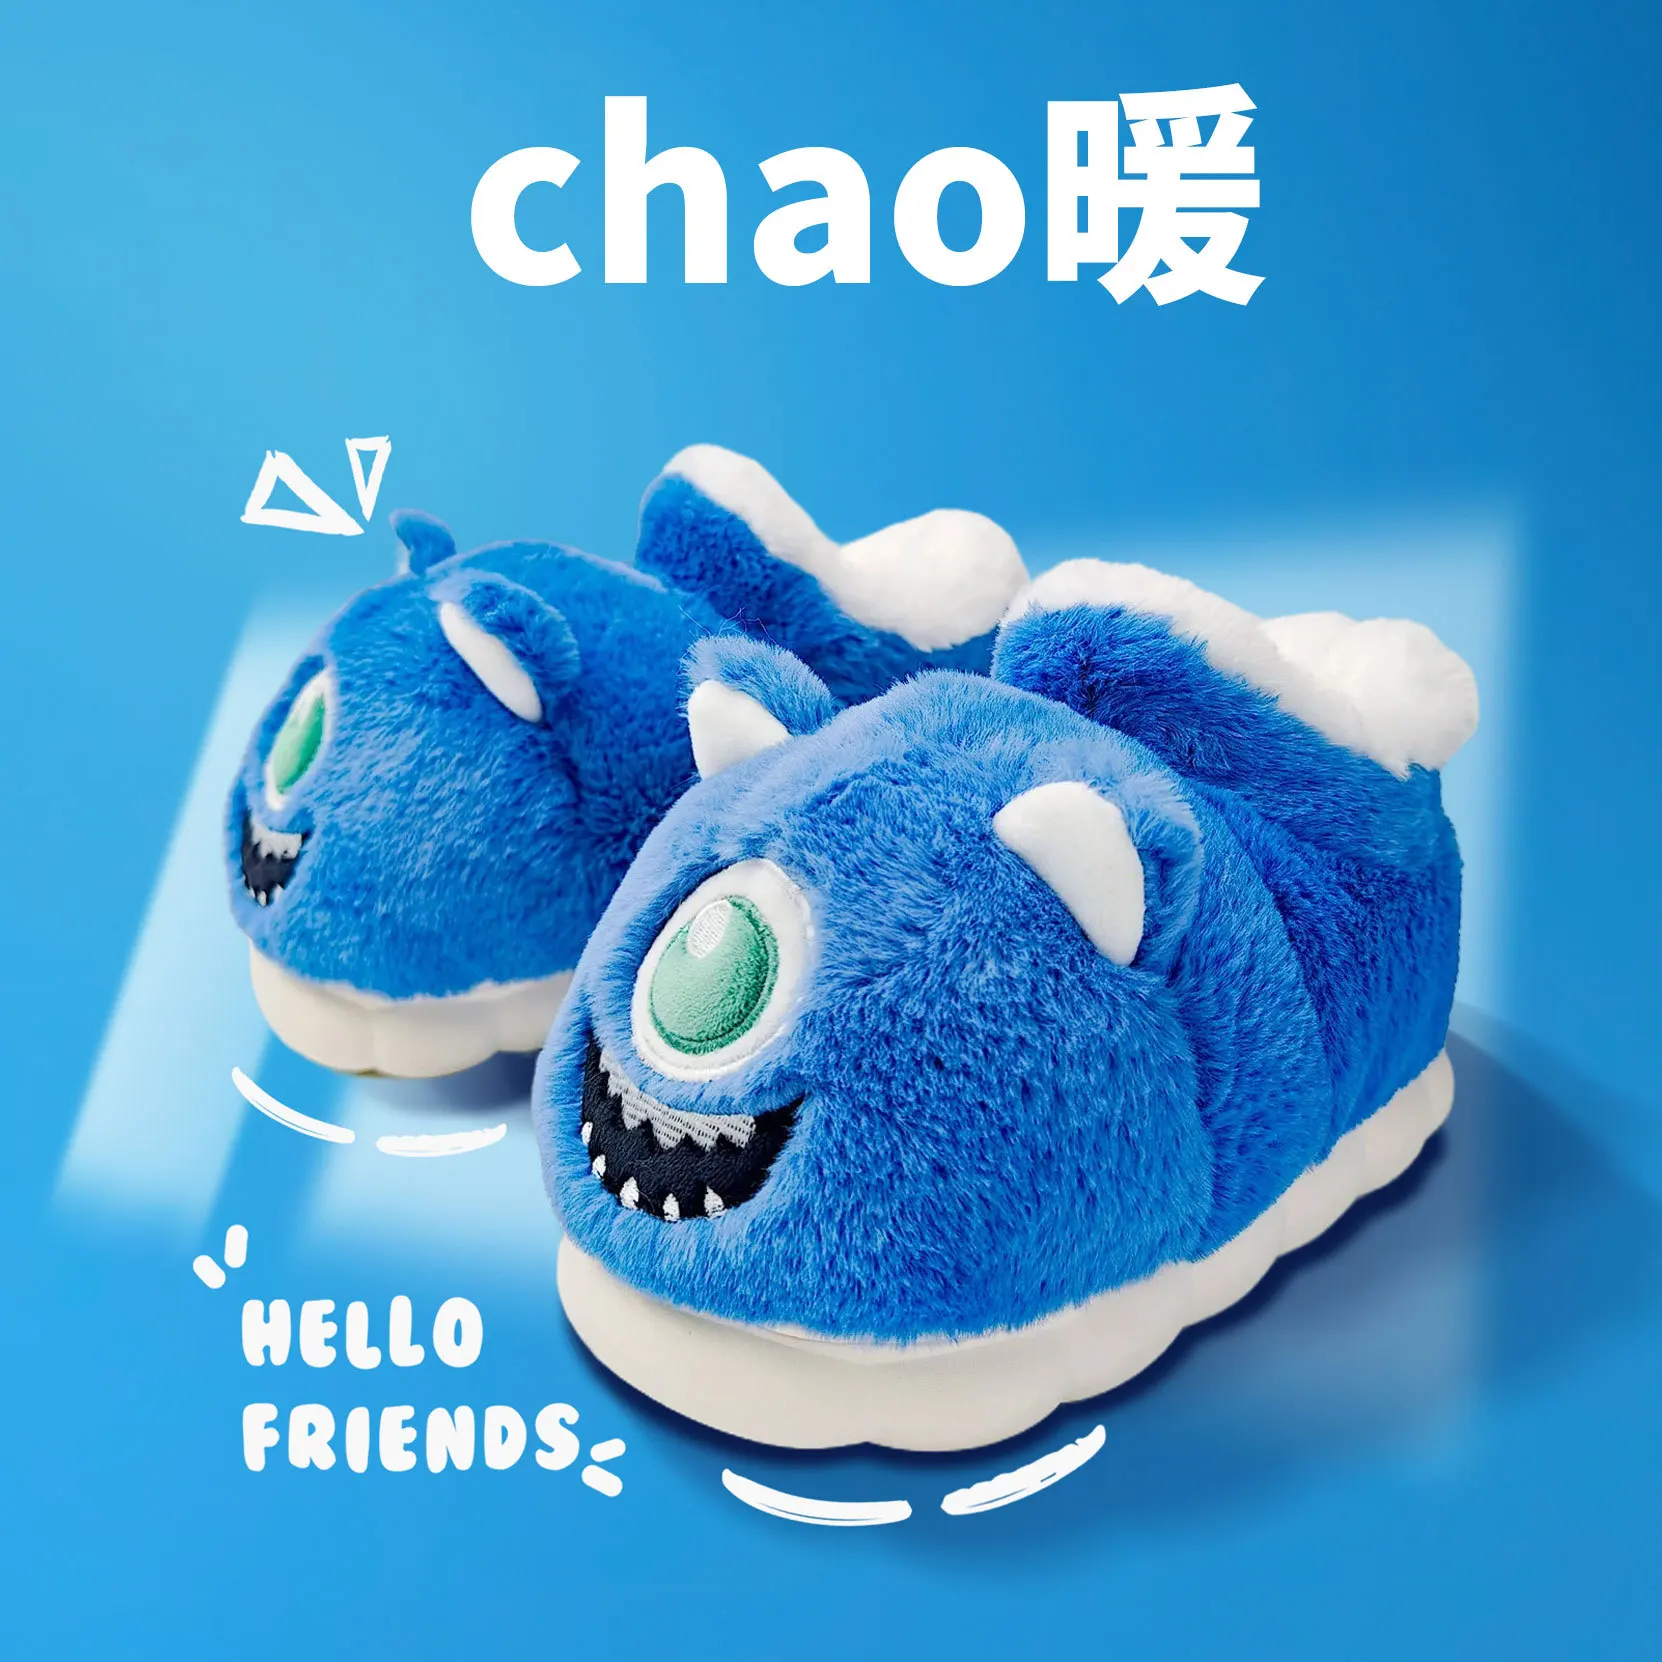 New Arrival Eye Monster Cute Cartoon Shoes Stuffed indoor home warm plus fuzzy slippers winter and Autumn Slippers For women